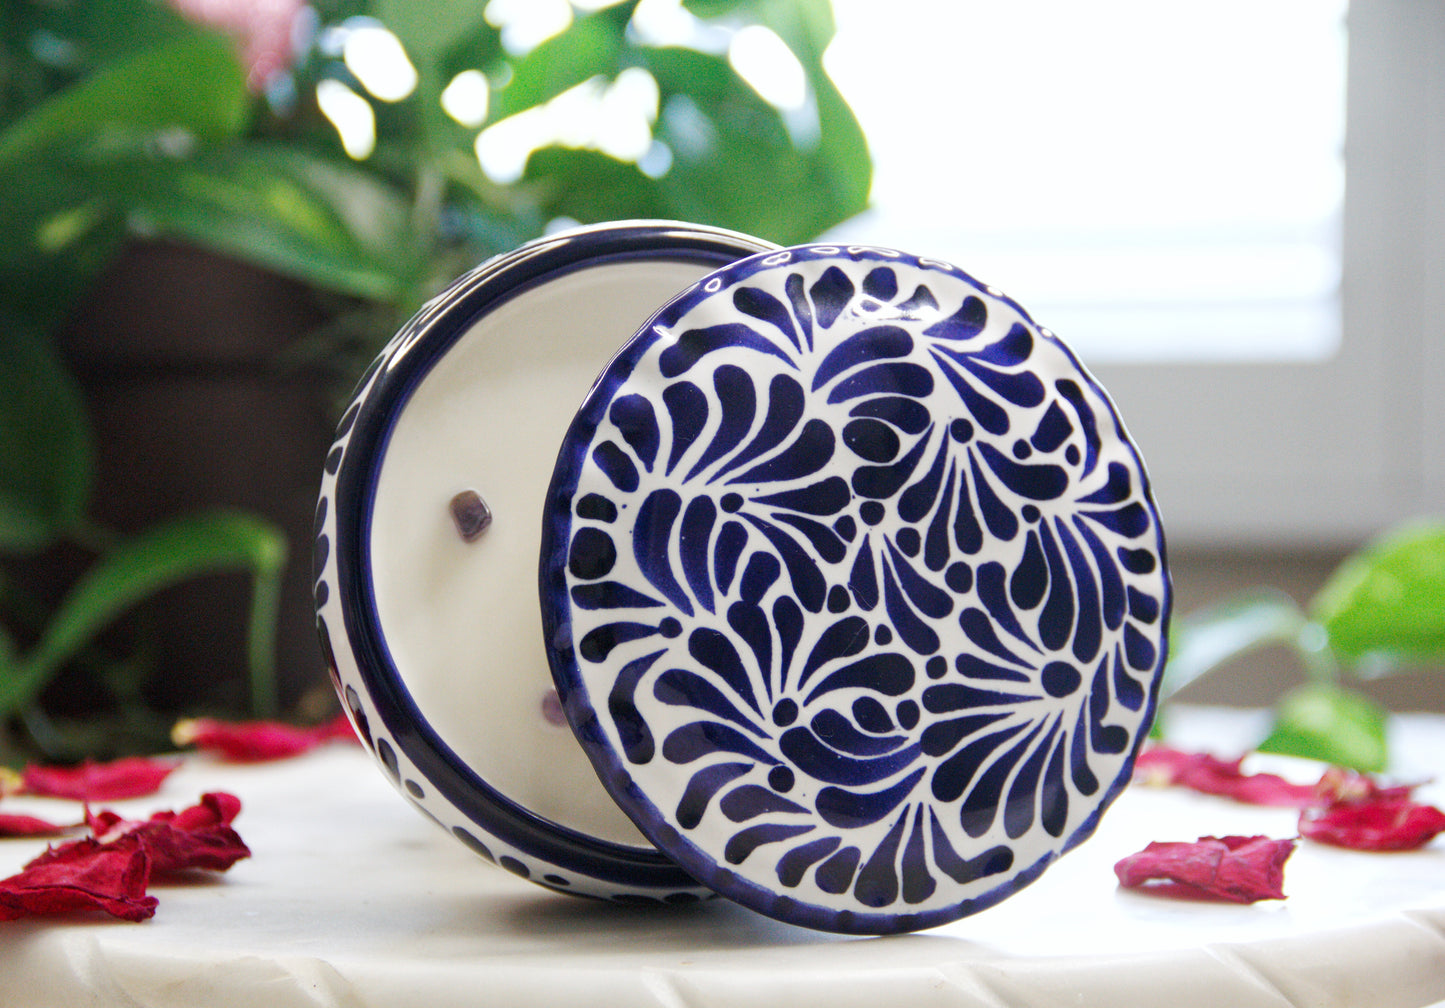 Side view of the Artisanal candle in a partial open lid beautiful talavera with hand made blue strokes design. Handcrafted by Artisan in Puebla, Mexico. 100% All Natural Soy Candle. Reuse the talavera as home decor or storage.